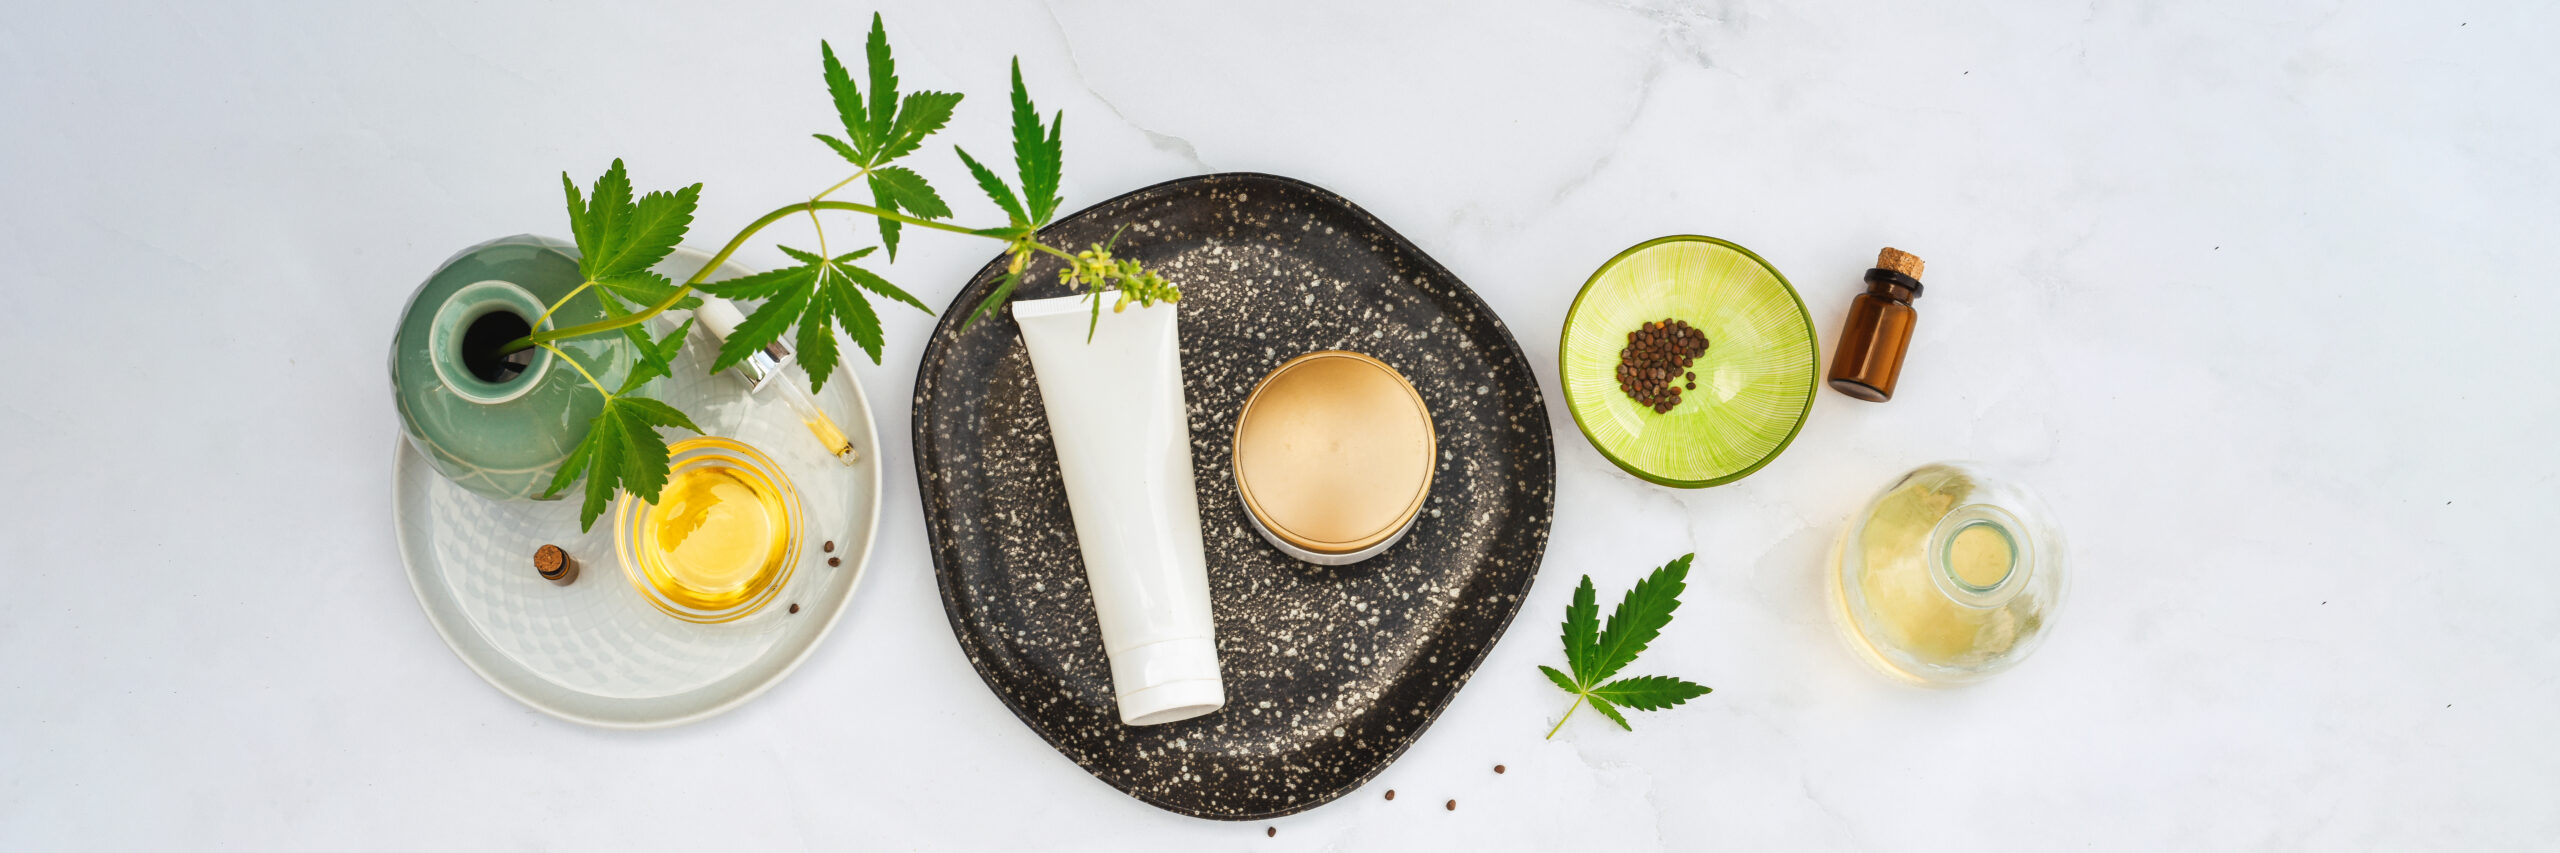 Cannabis Lotion: Do THC Topicals Really Work?